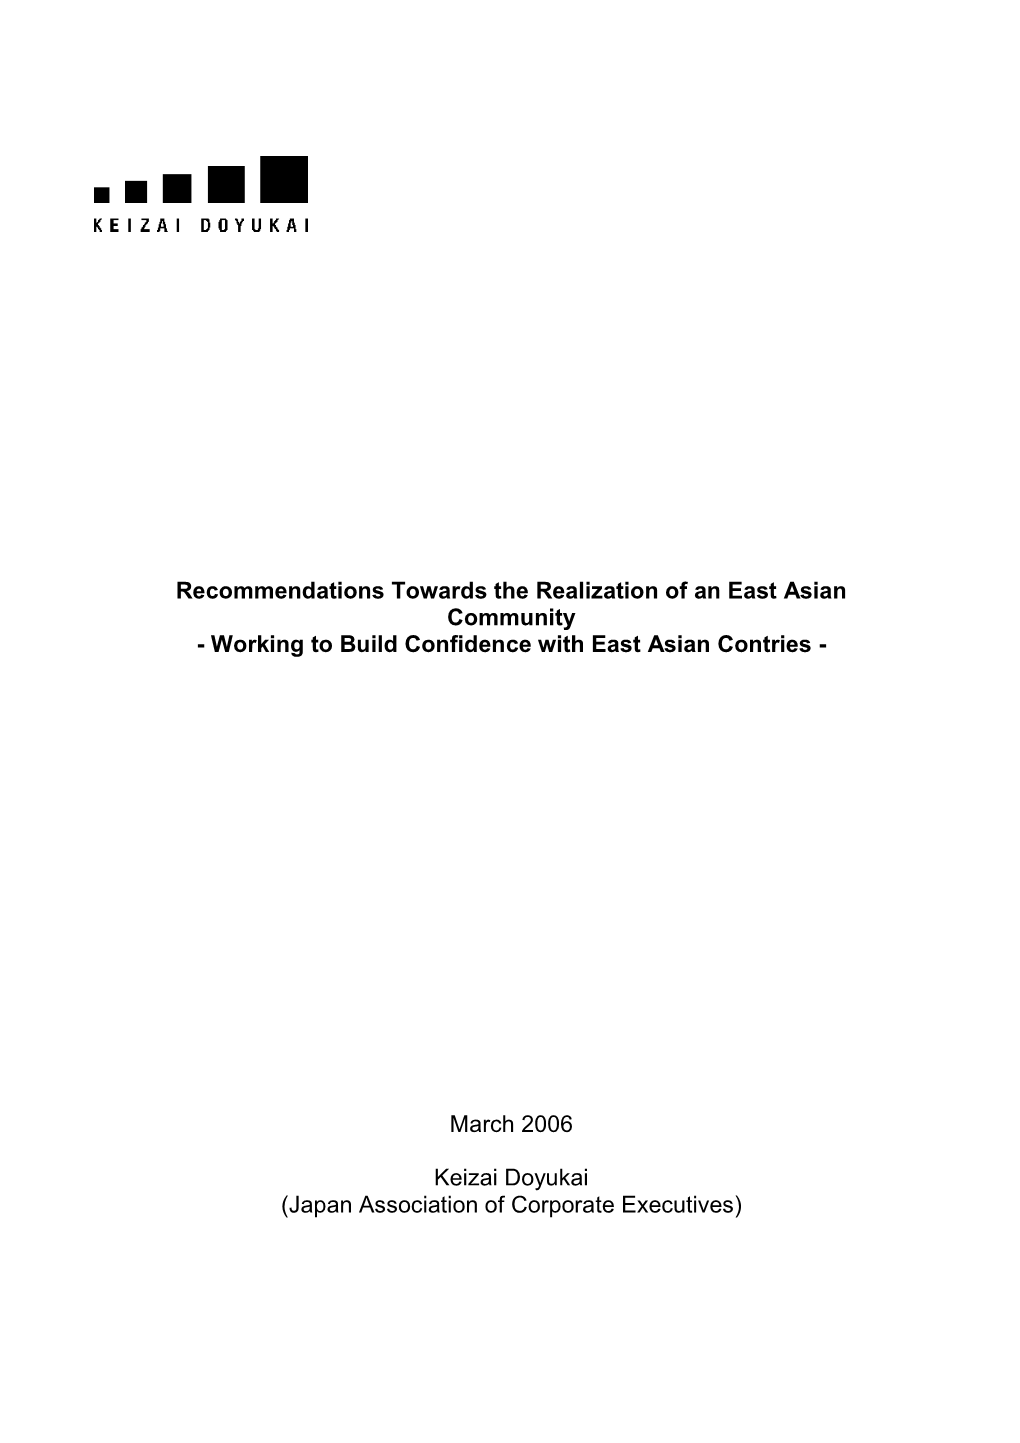 Recommendations Towards the Realization of an East Asian Community・・・・・・18 1